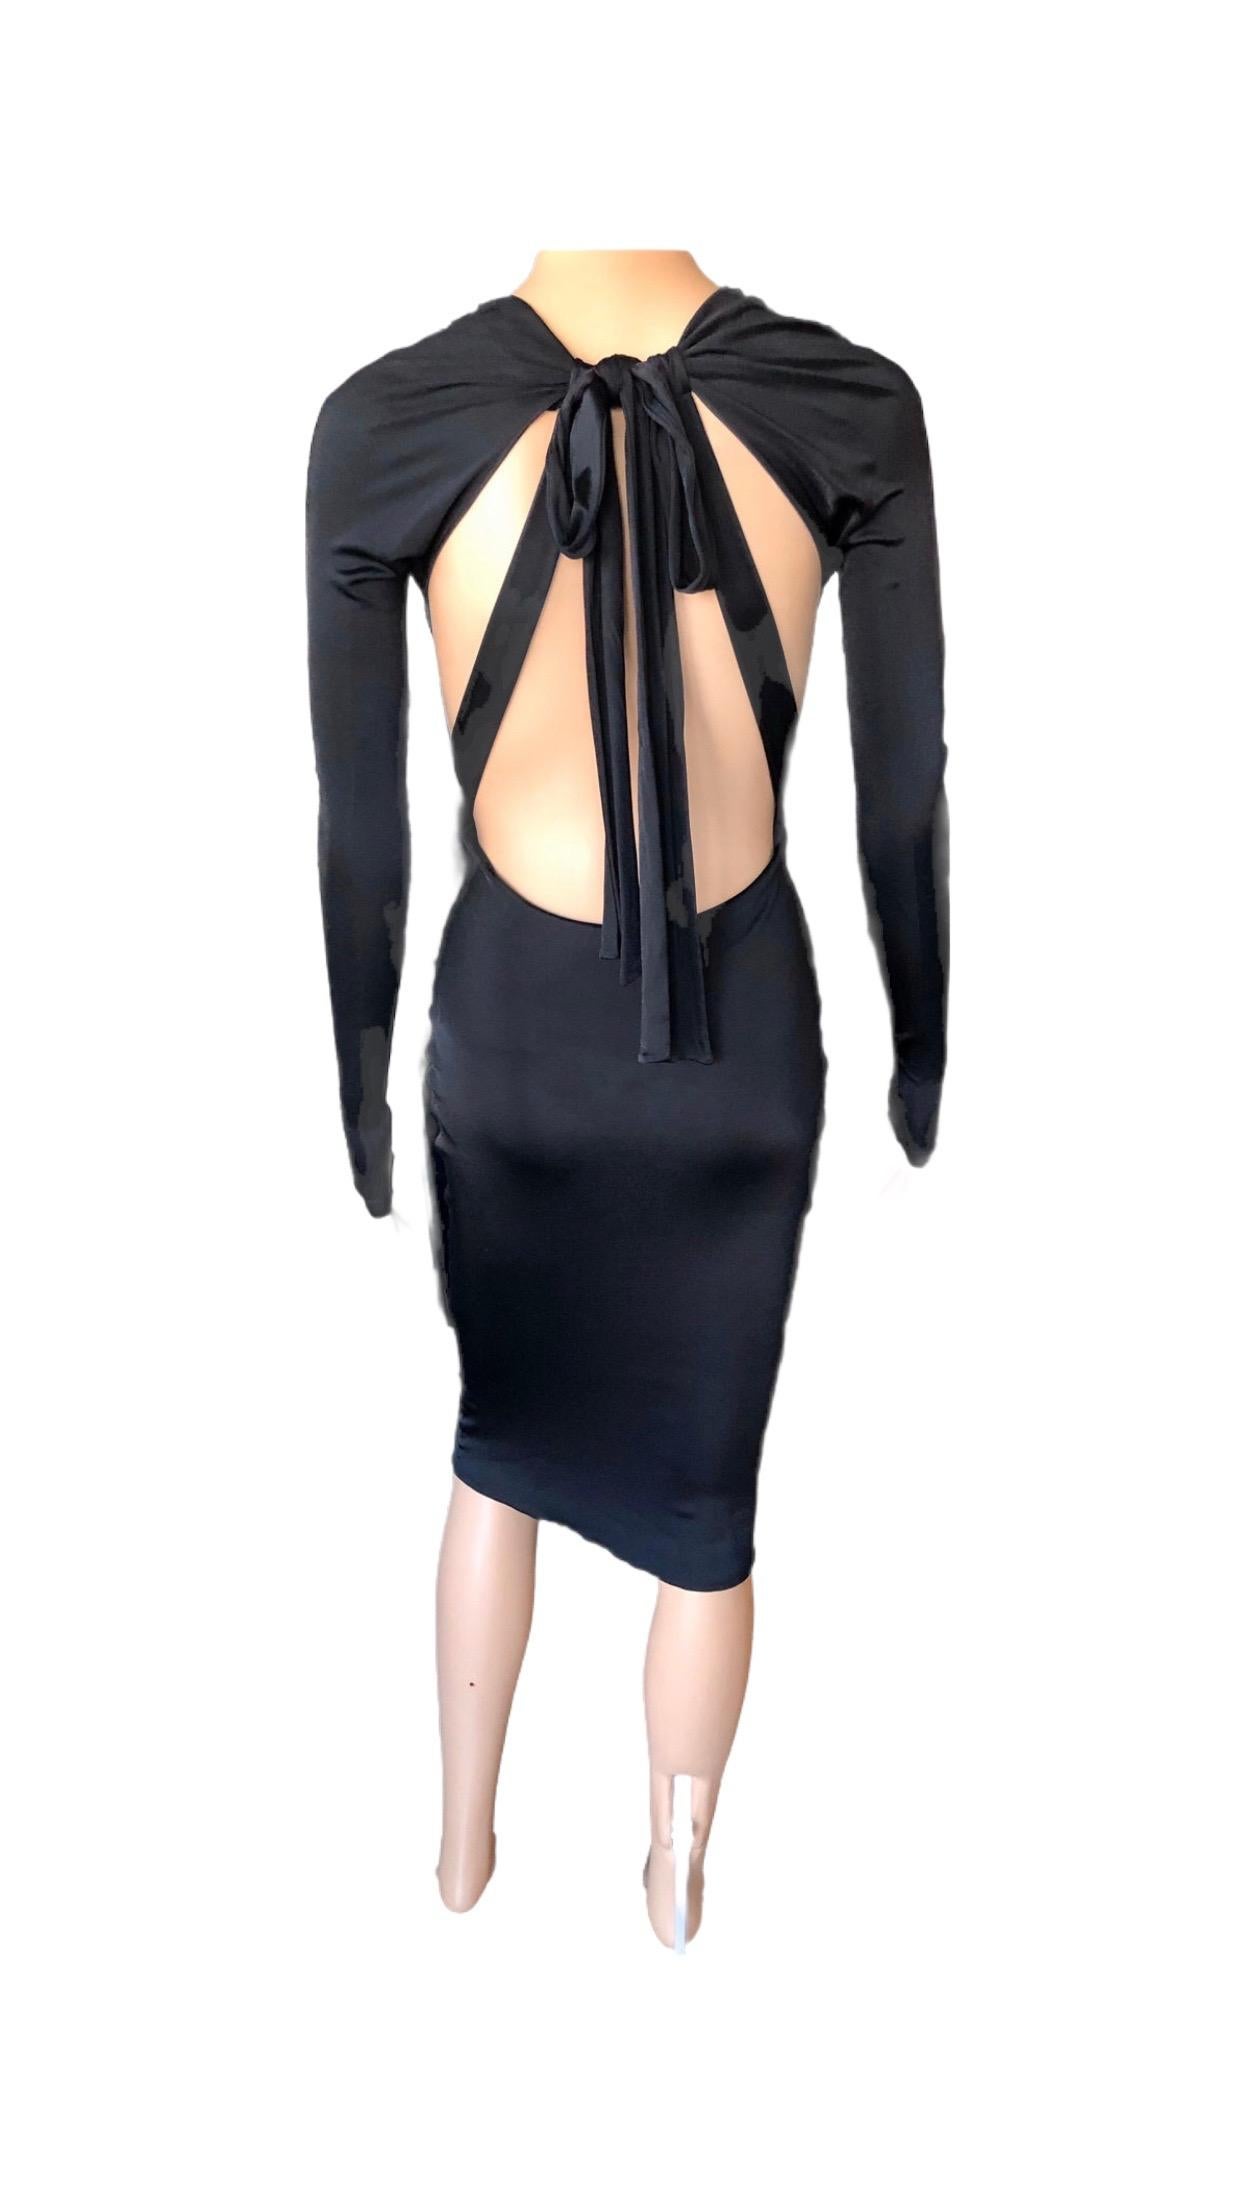 Gucci S/S 2005 Tom Ford Plunging Cutout Backless Bodycon Black Dress For Sale 9